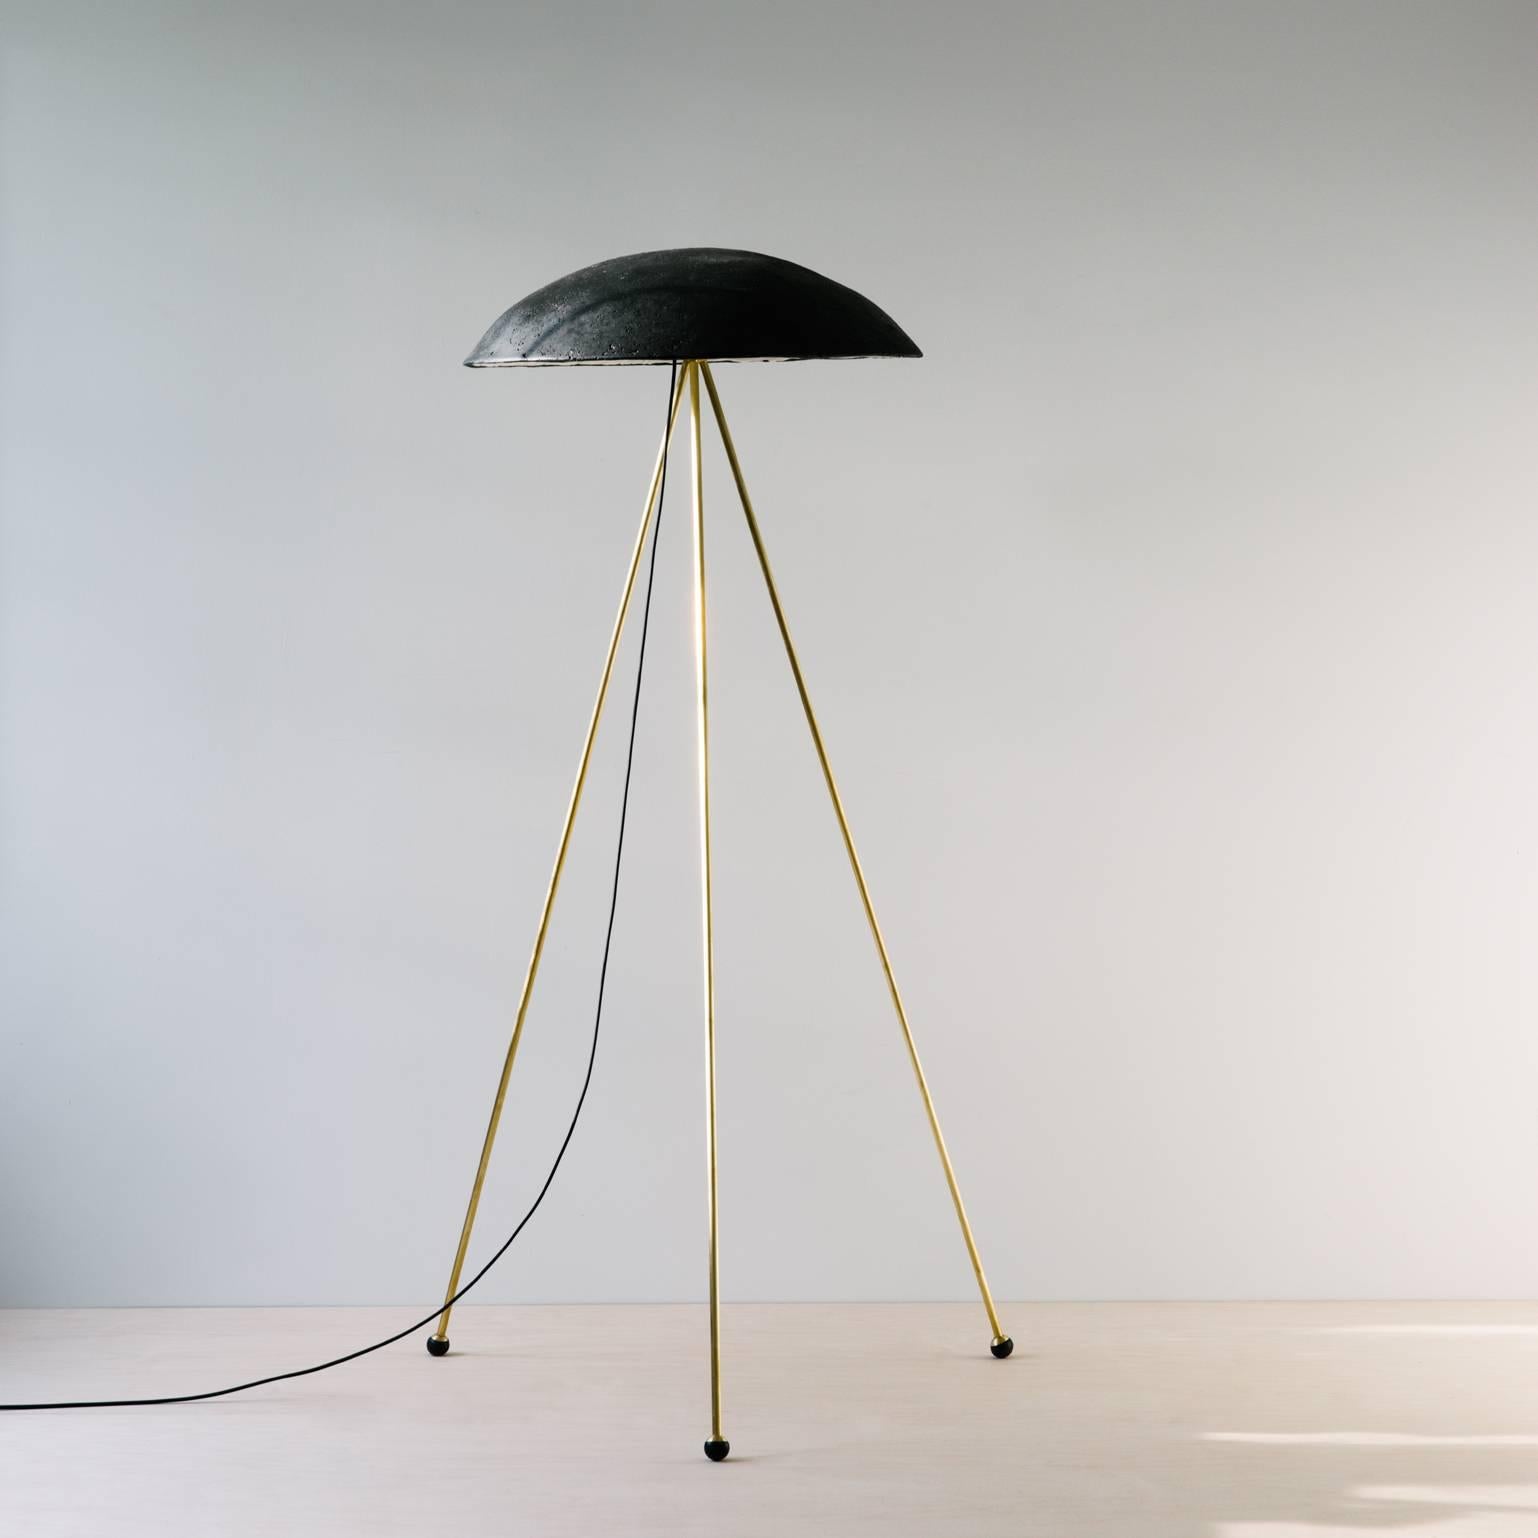 The Tall Buddy Floor Lamp is more staid than the funny buddy with an unmoving 